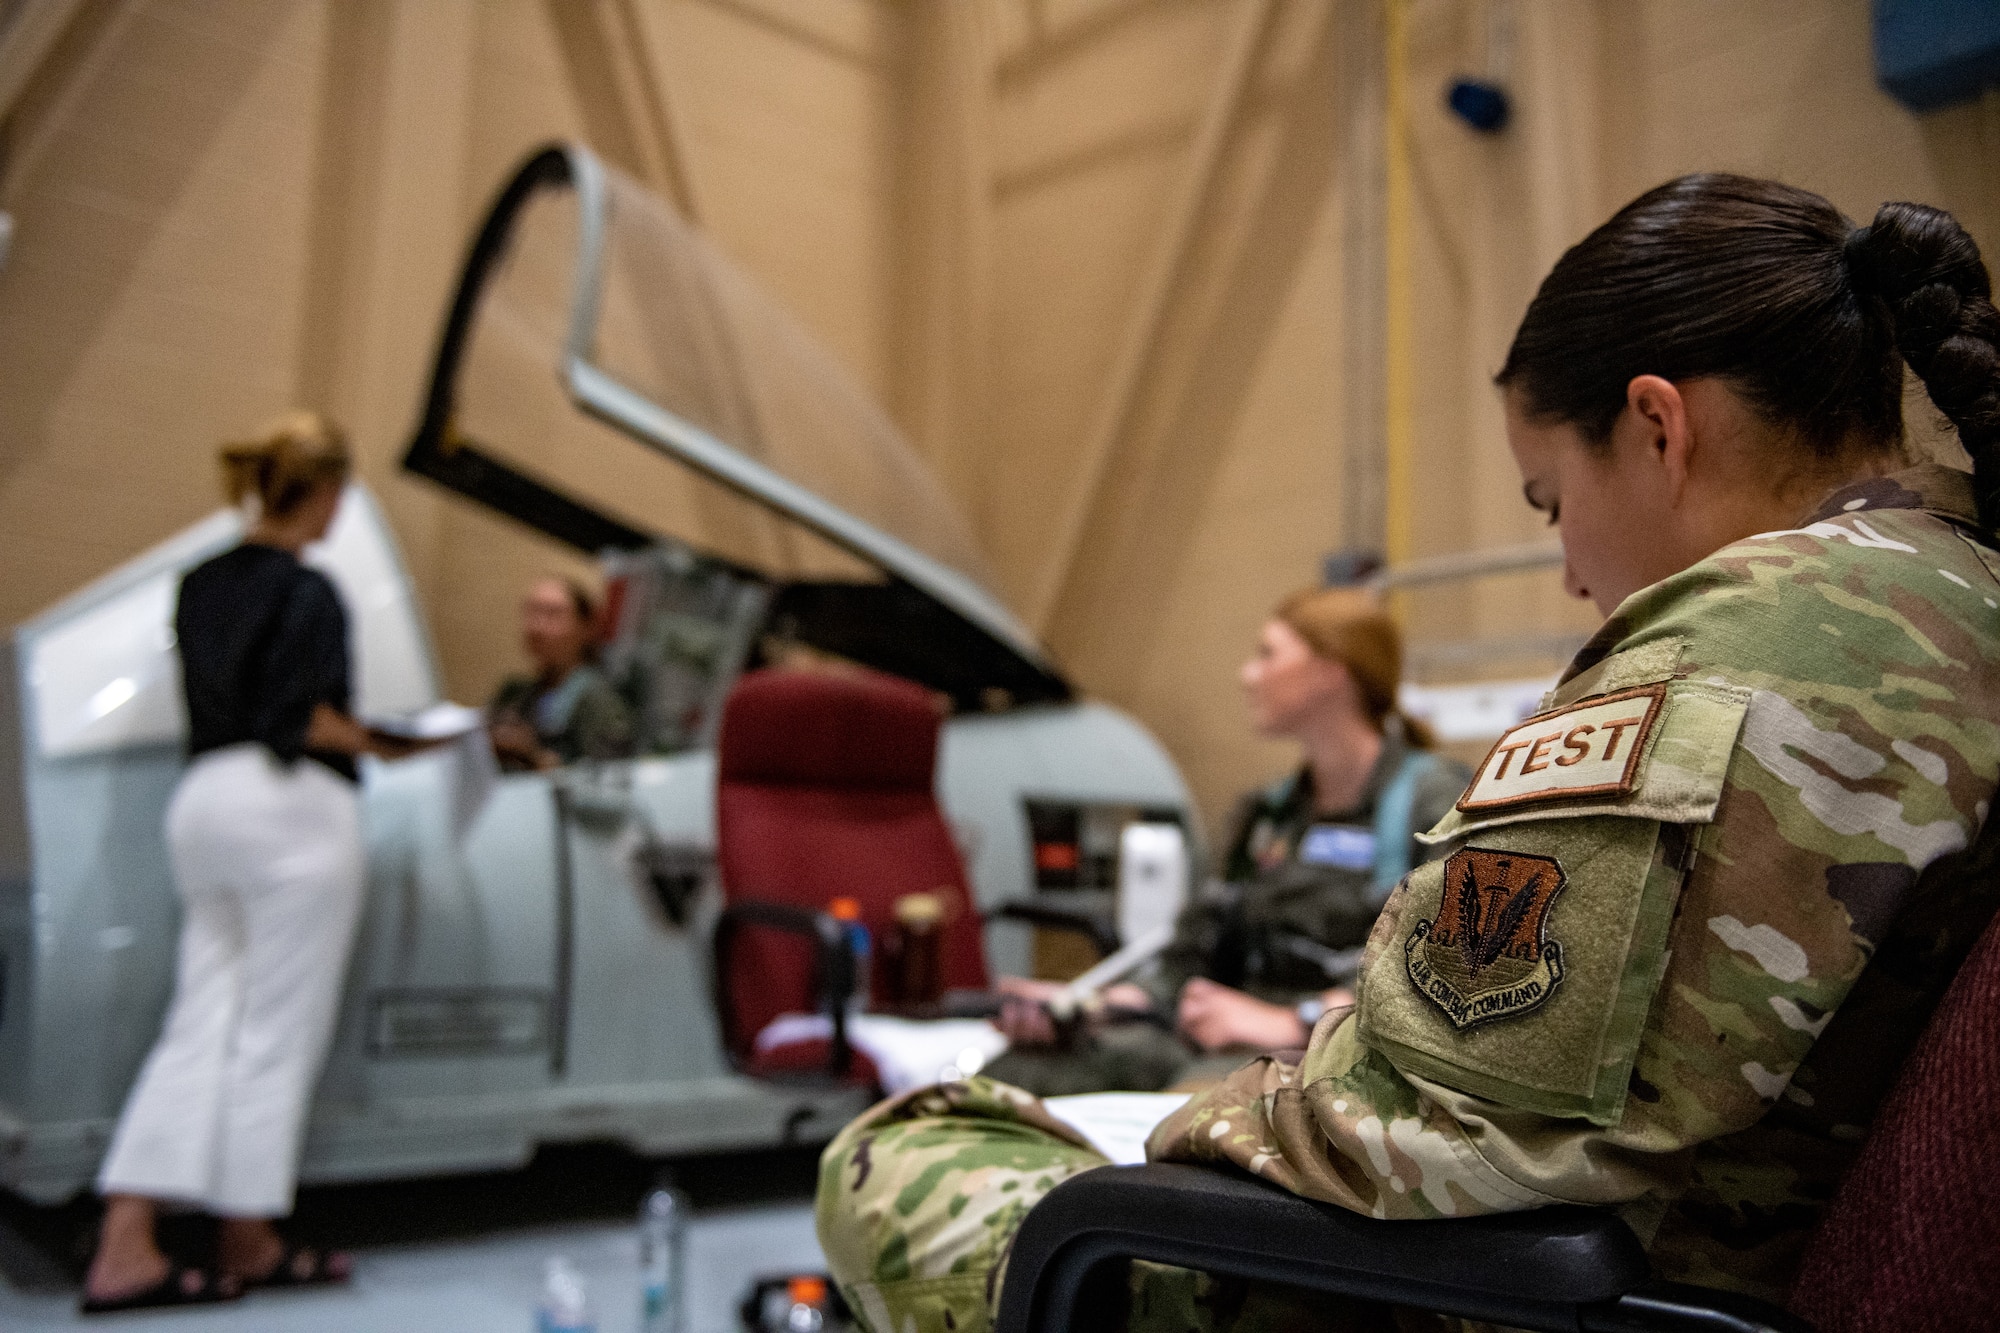 The Air Force Life Cycle Management Center Human Systems Division test an Airus bladder relief system at Moody Air Force Base, Georgia, Aug. 28, 2023. The new system design was tested to evaluate the effectiveness with female pilots. (U.S. Air Force photo by Senior Airman Courtney Sebastianelli)